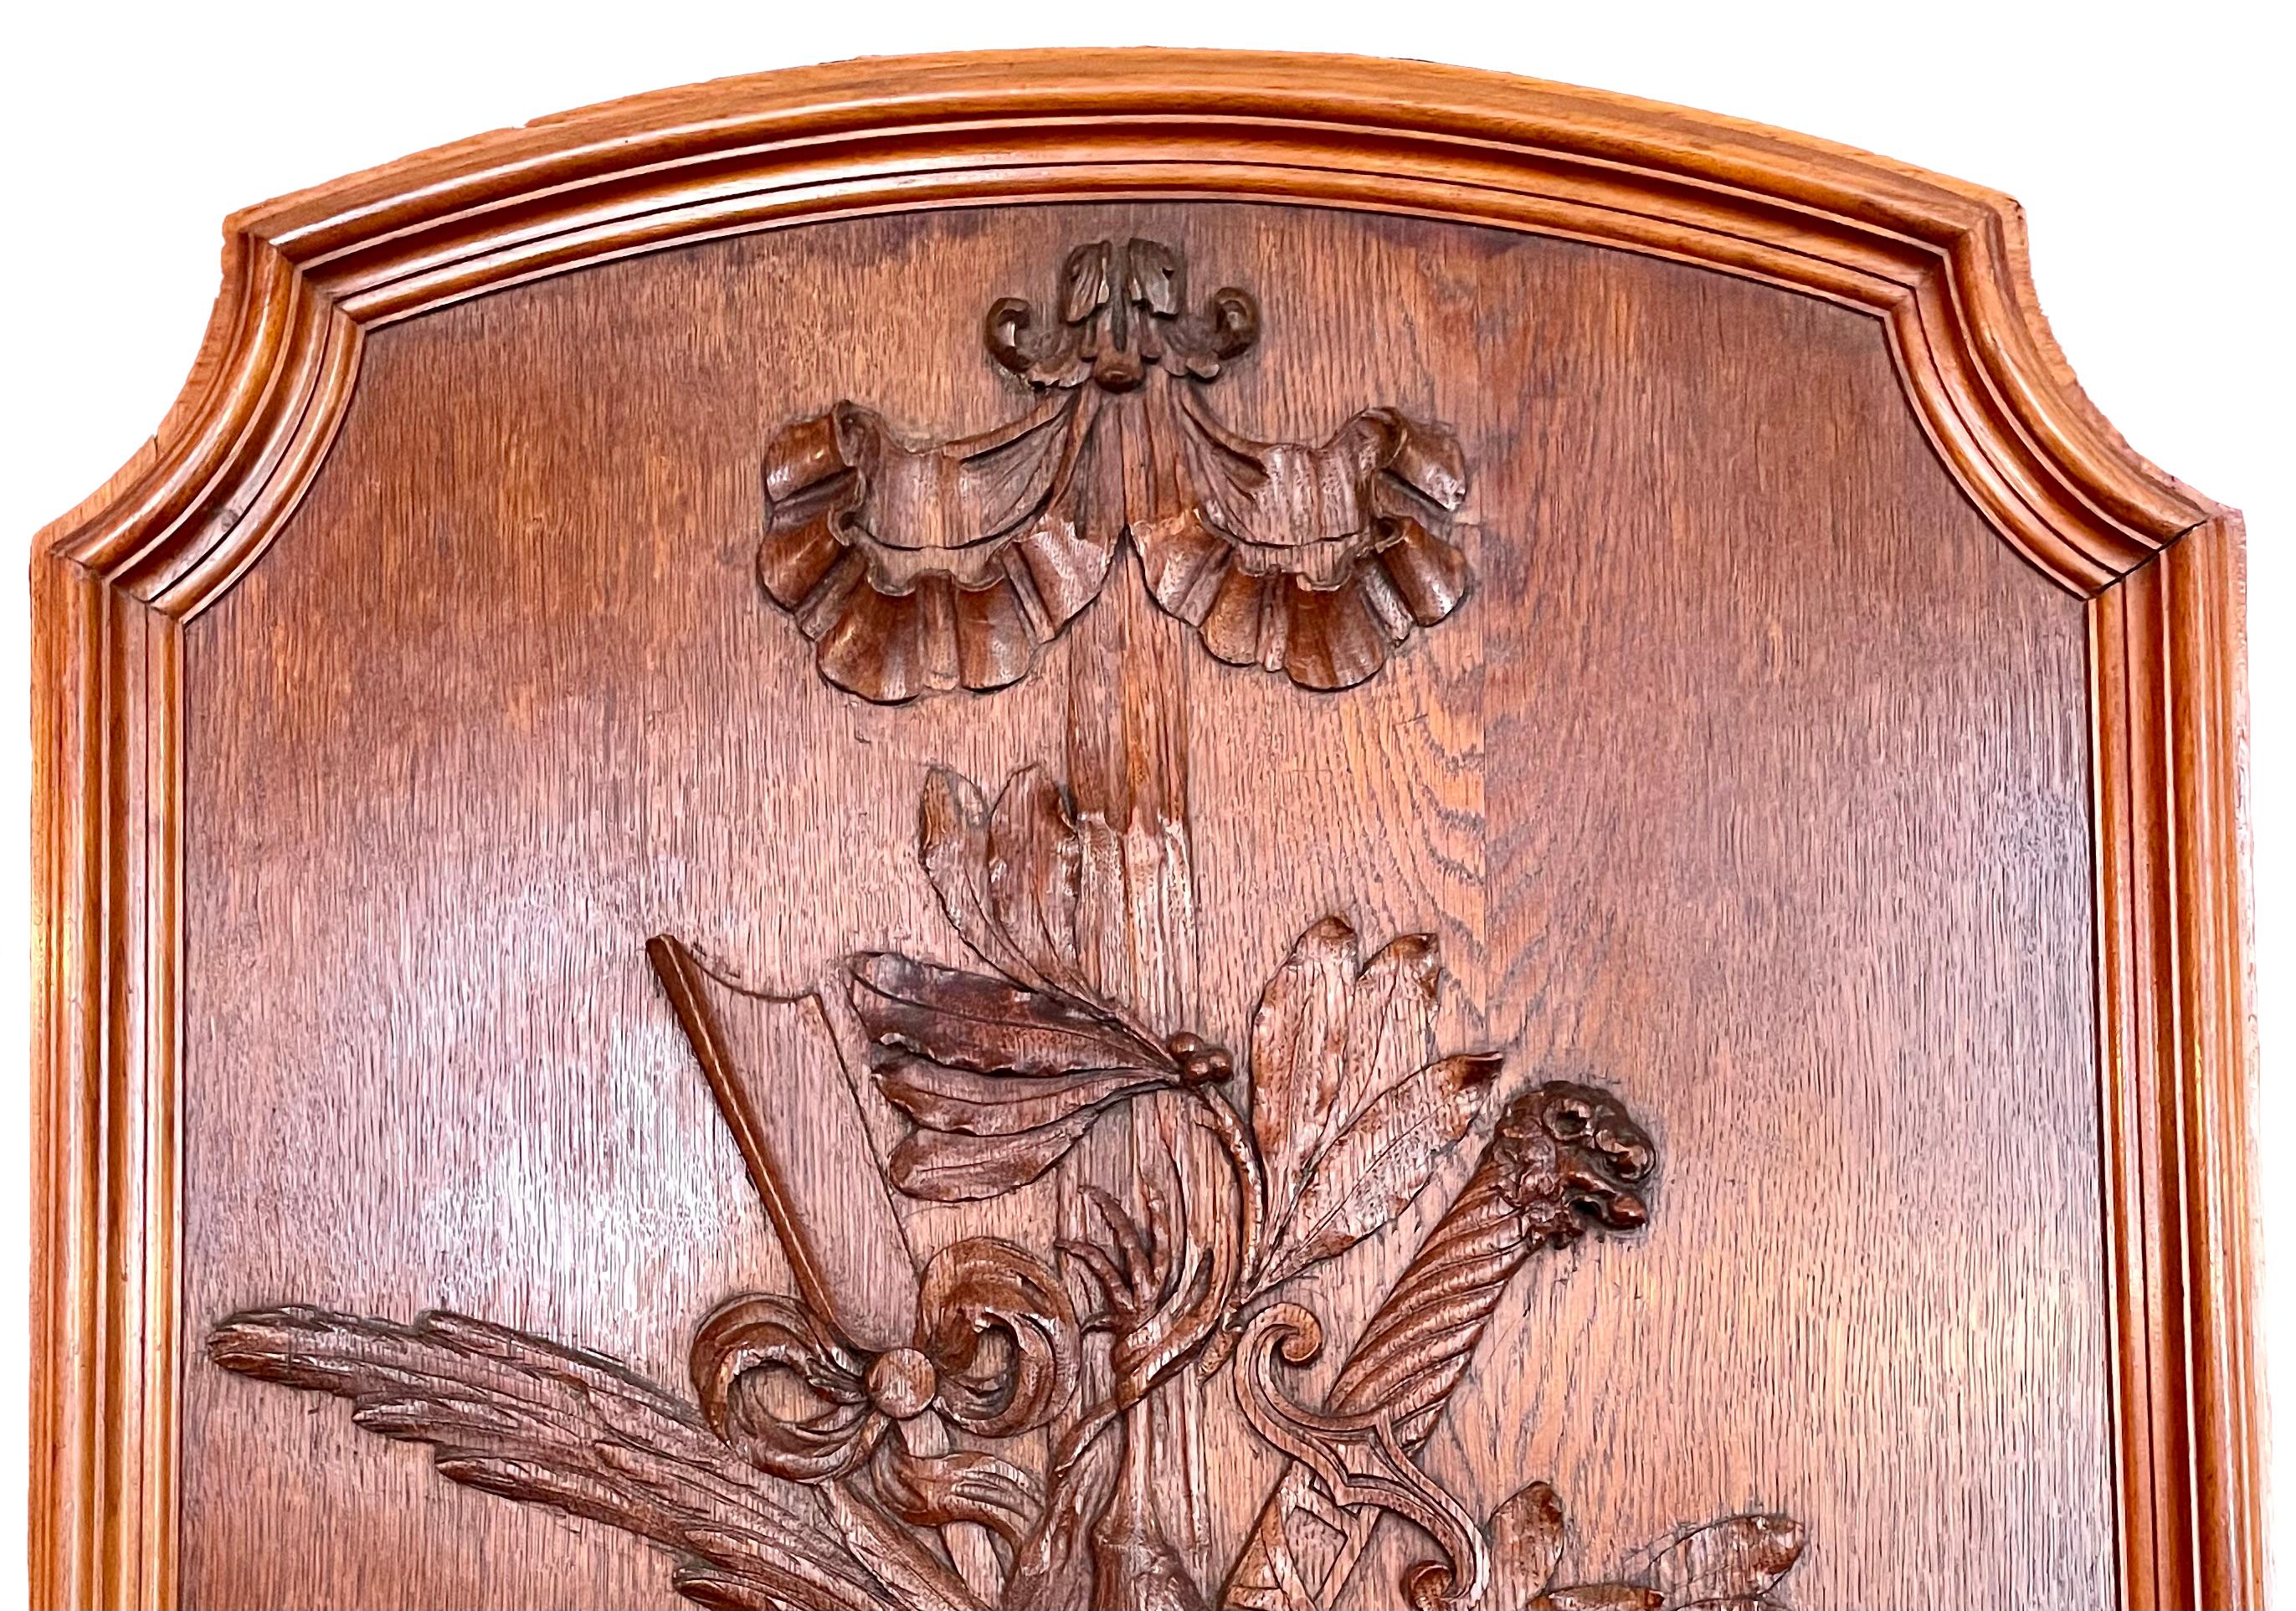 19th Century Antique French Carved Walnut 